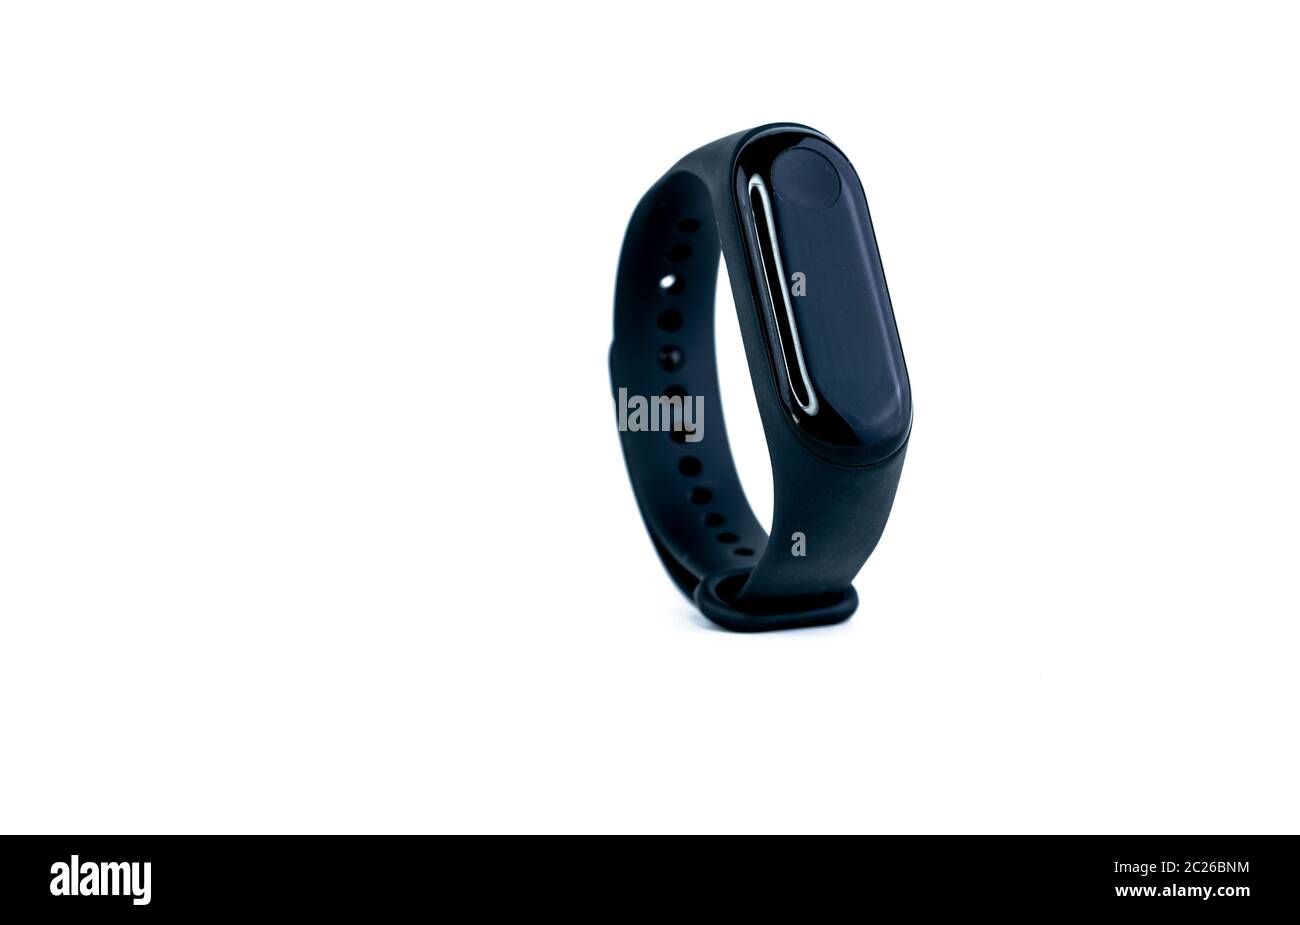 Smart band. Fitness device. Activity or fitness tracker. Smart watch connected device. Sleep tracker. Wristband for Medical and insurance providers. Heart rate monitor bracelet. Wearable computer. Stock Photo